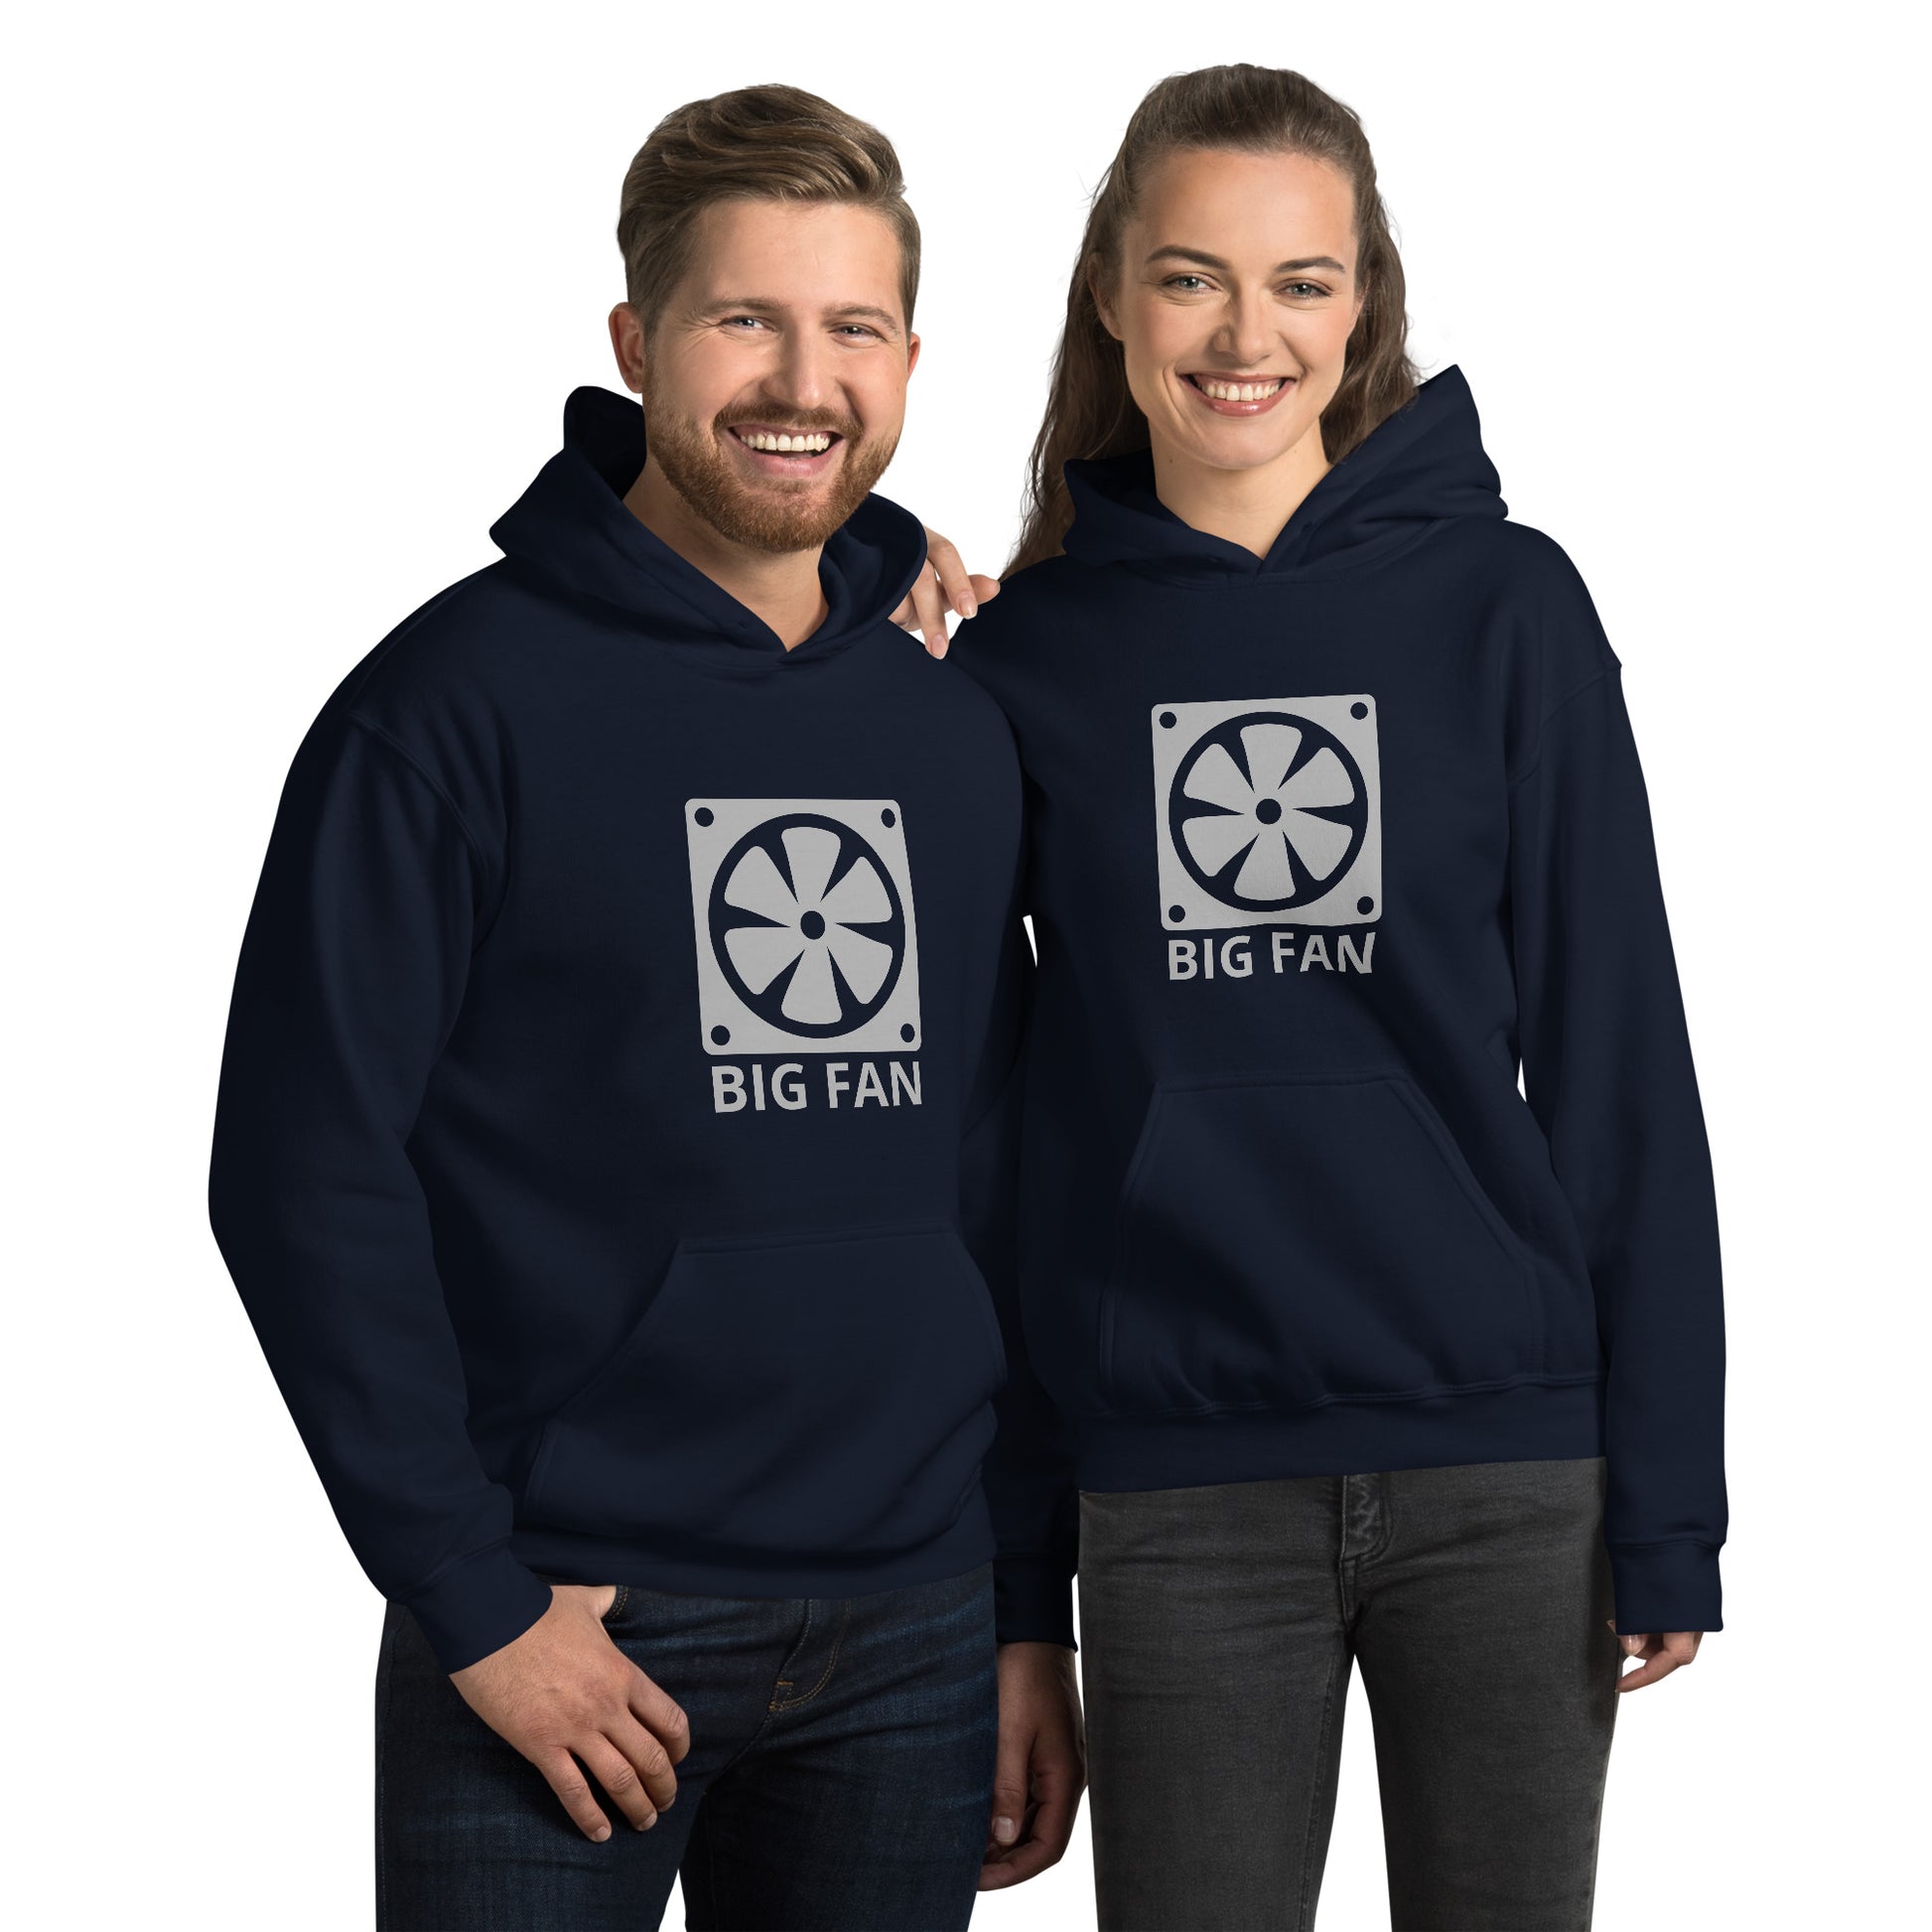 Man and women with navy blue hoodie with image of a big computer fan and the text "BIG FAN"